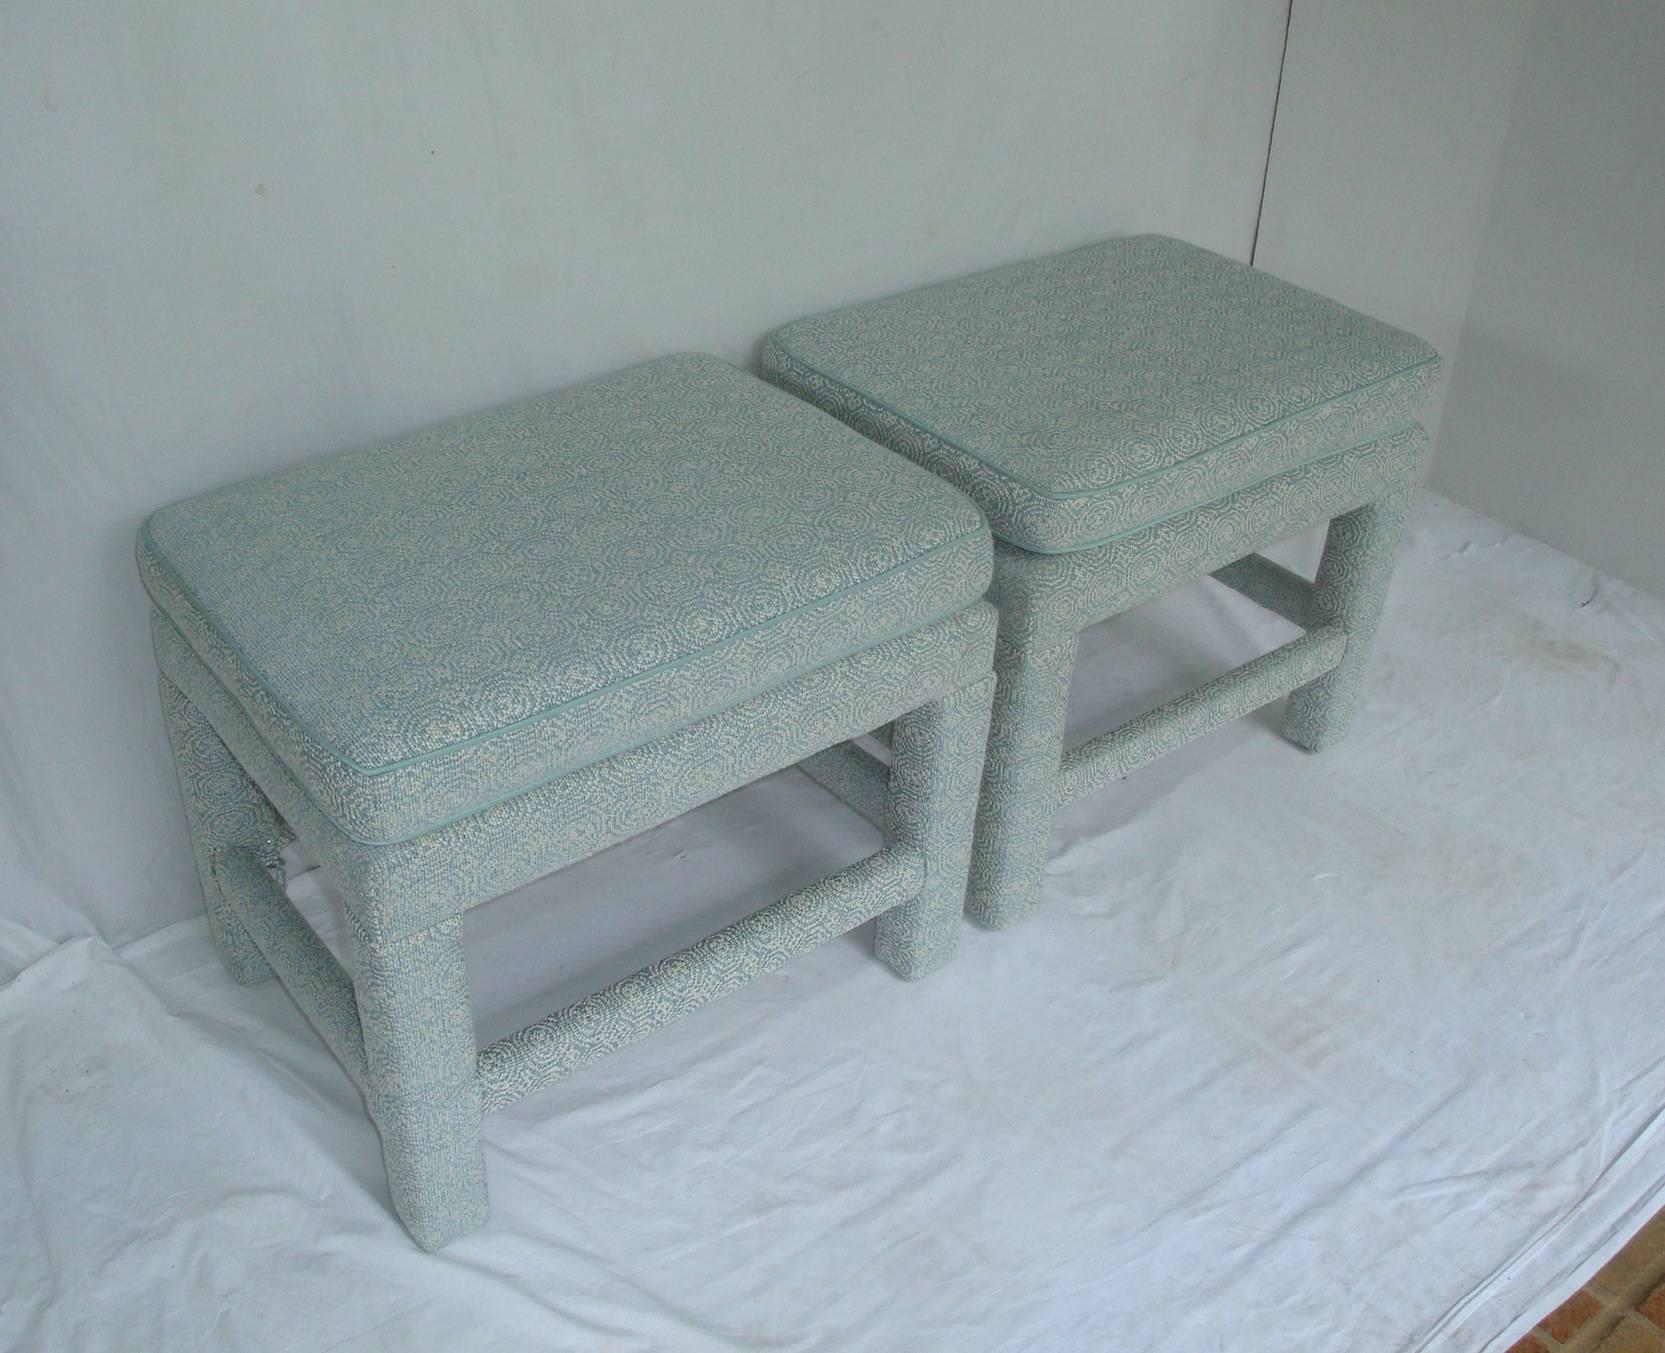 Offered is a stunning, pair of 1960s, Milo Baughman style Parsons stools. Recently reupholstered in a gorgeous slightly nubby soft blue and ivory linen blend fabric by Travers with an abstract circular geometric pattern. Complementary robin's egg